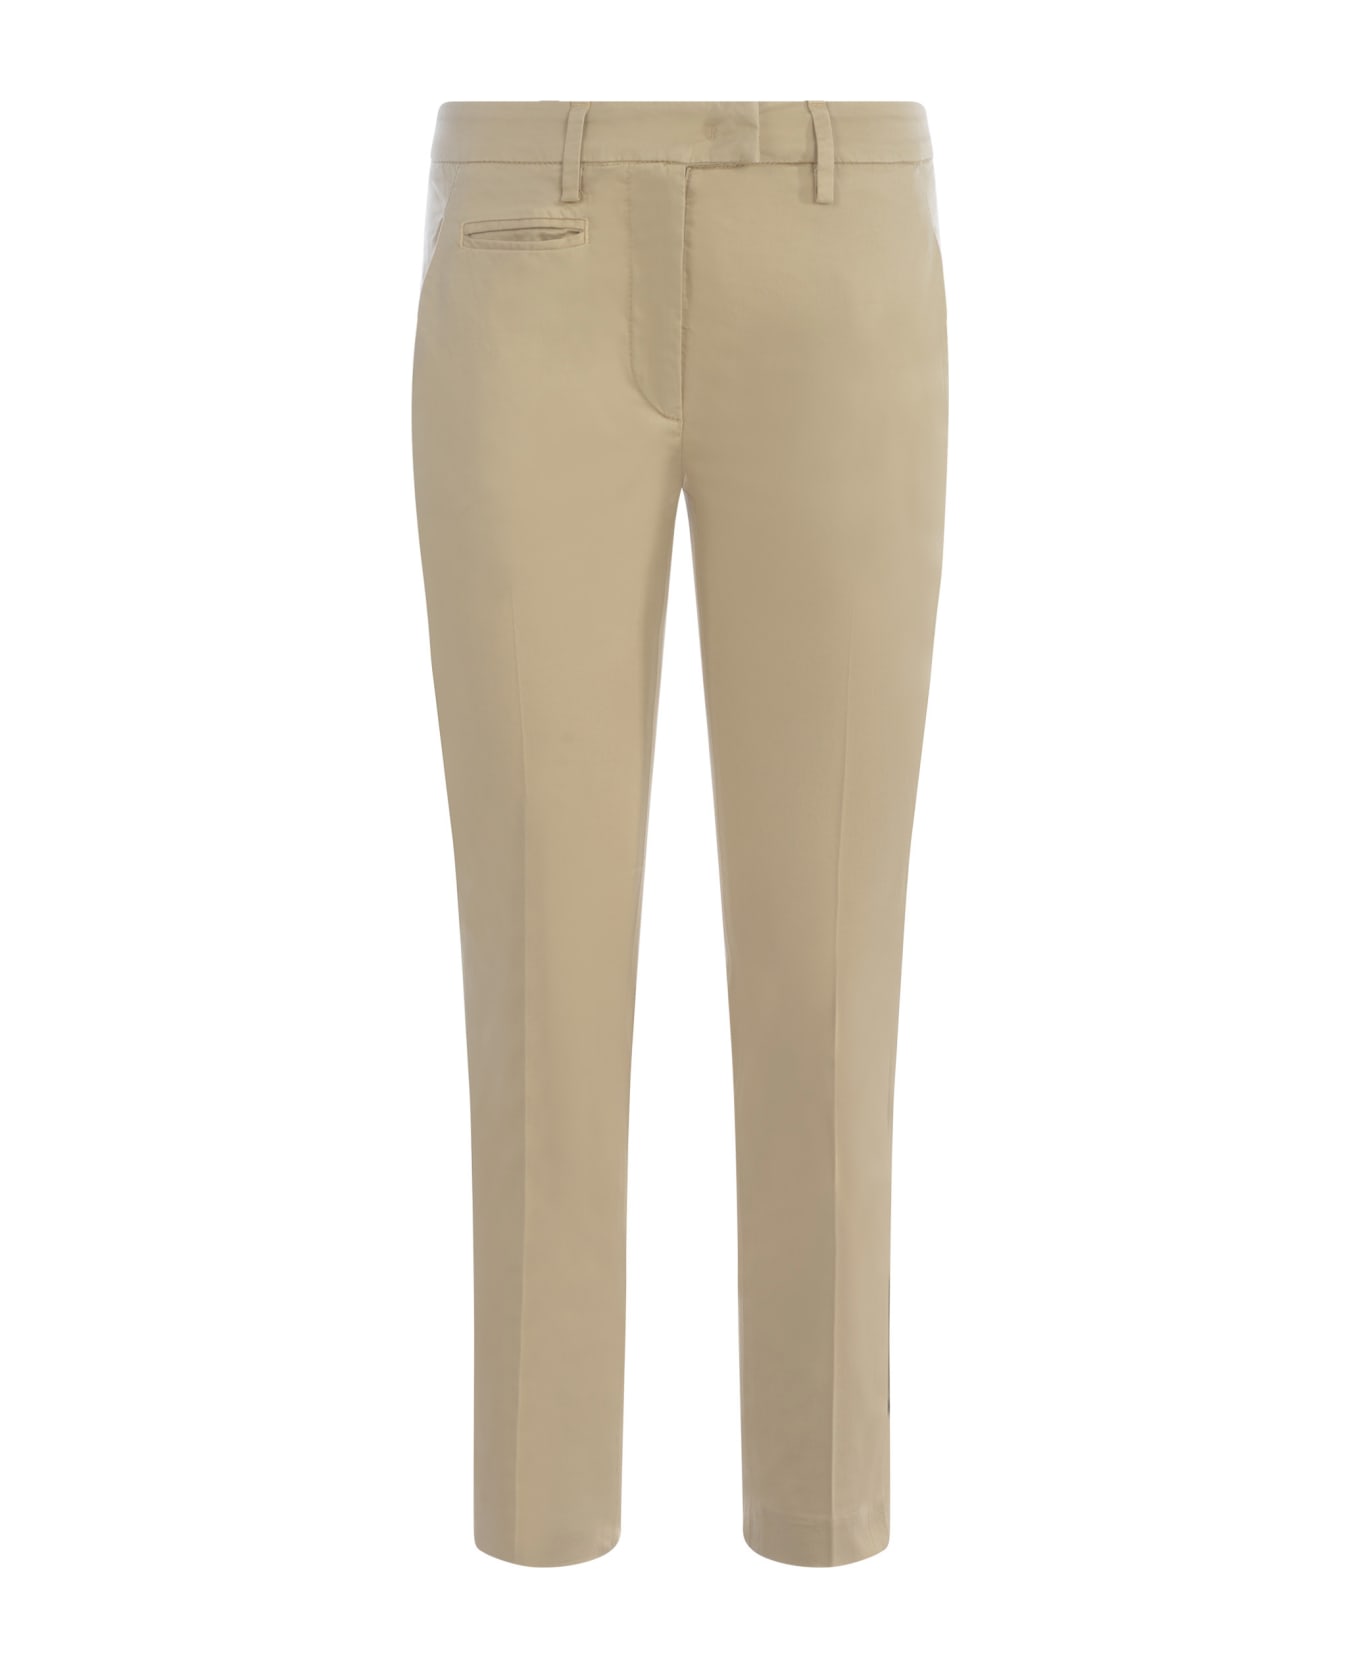 Dondup Trousers Dondup "perfect" In Stretch Cotton - Beige